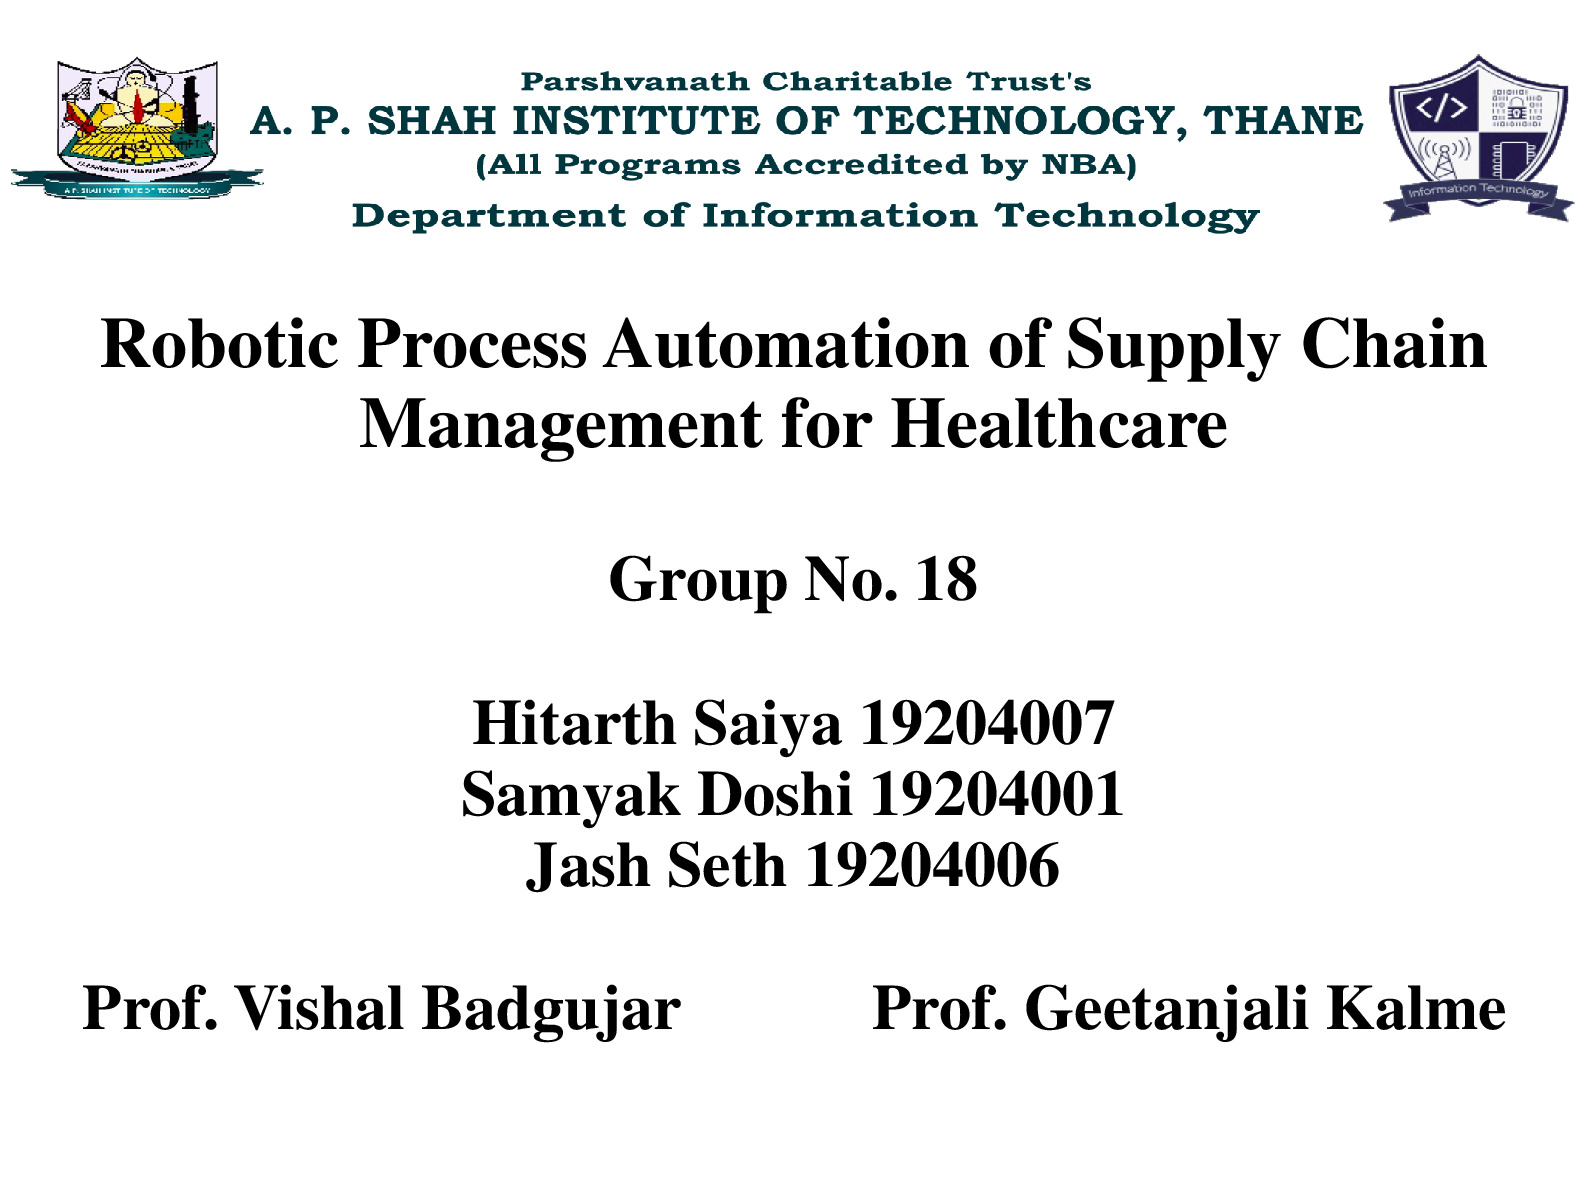 18_Robotic Process Automation of Supply Chain Management for Healthcare PPT2